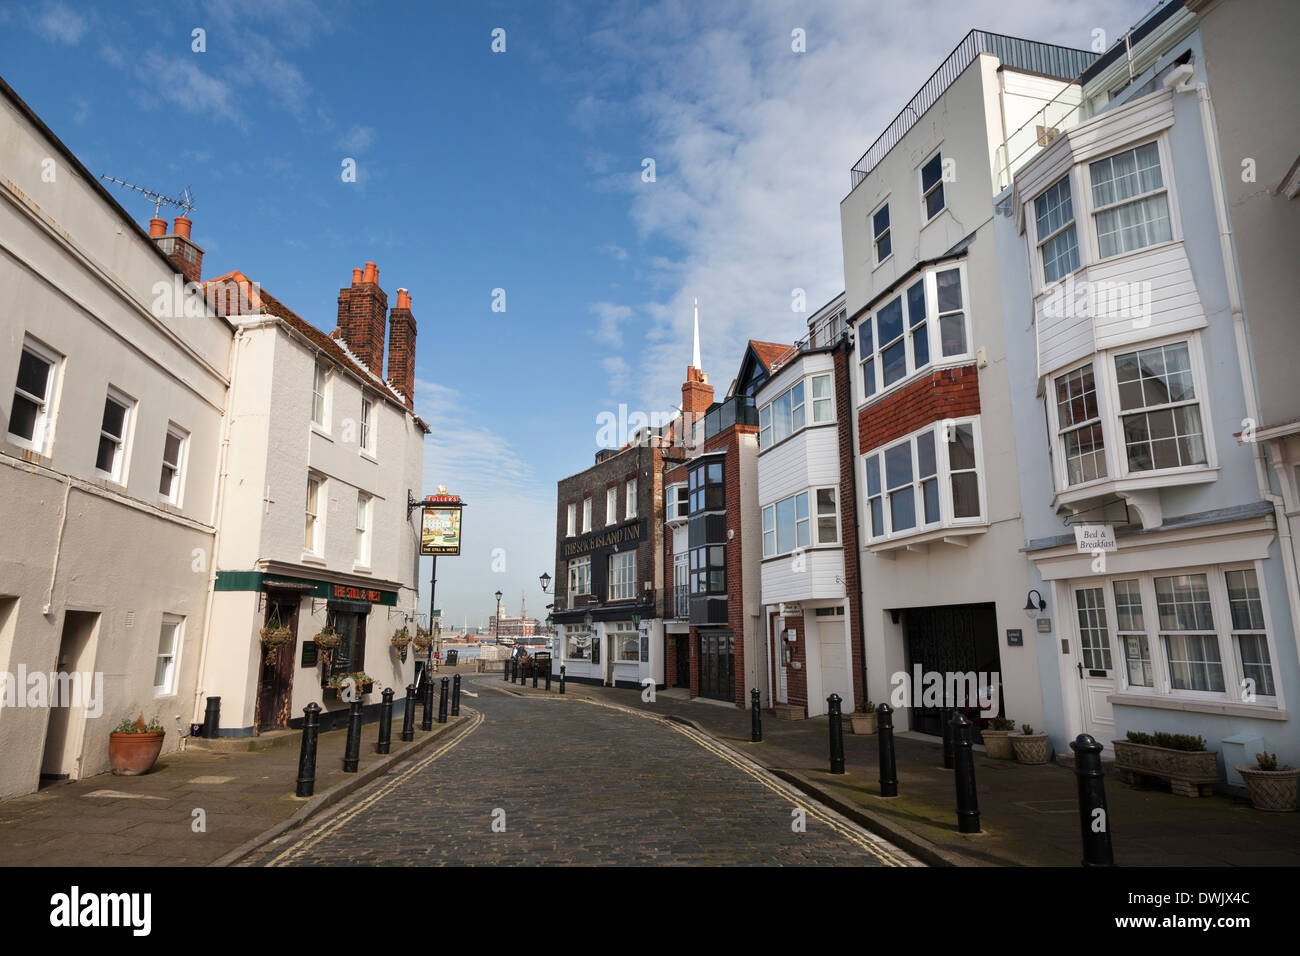 Cobbled streets and old houses of Spice Island, Old Portsmouth. Stock Photo